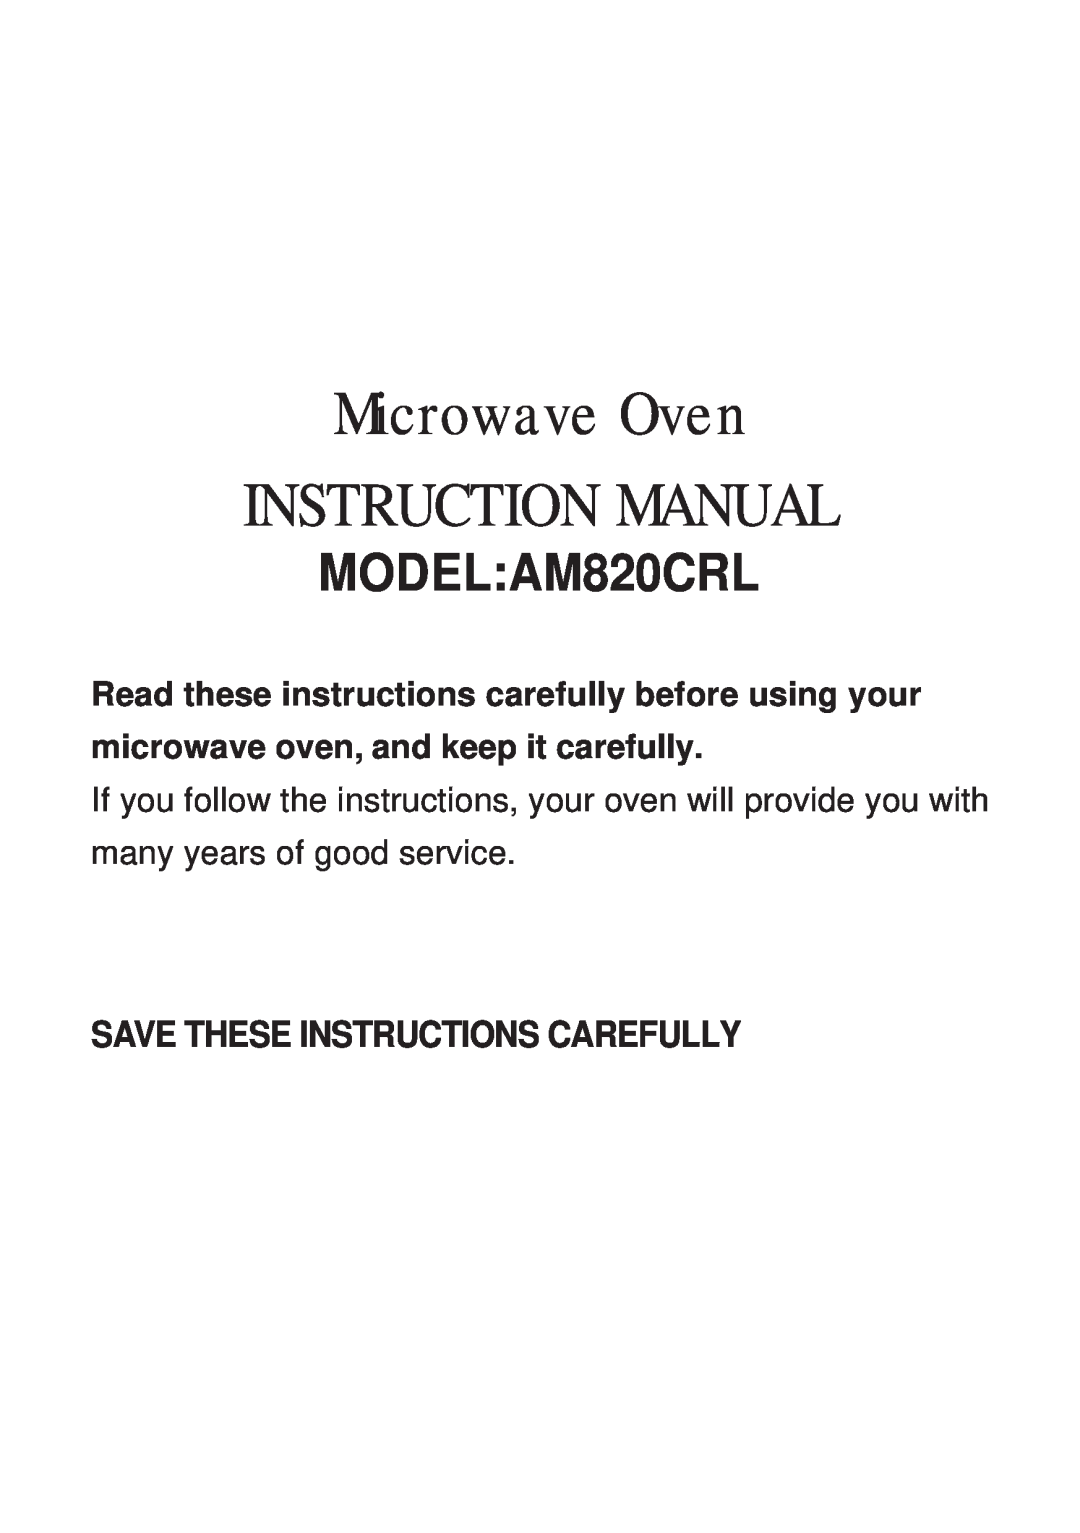 Akai instruction manual Save These Instructions Carefully, Microwave Oven, MODEL AM820CRL 